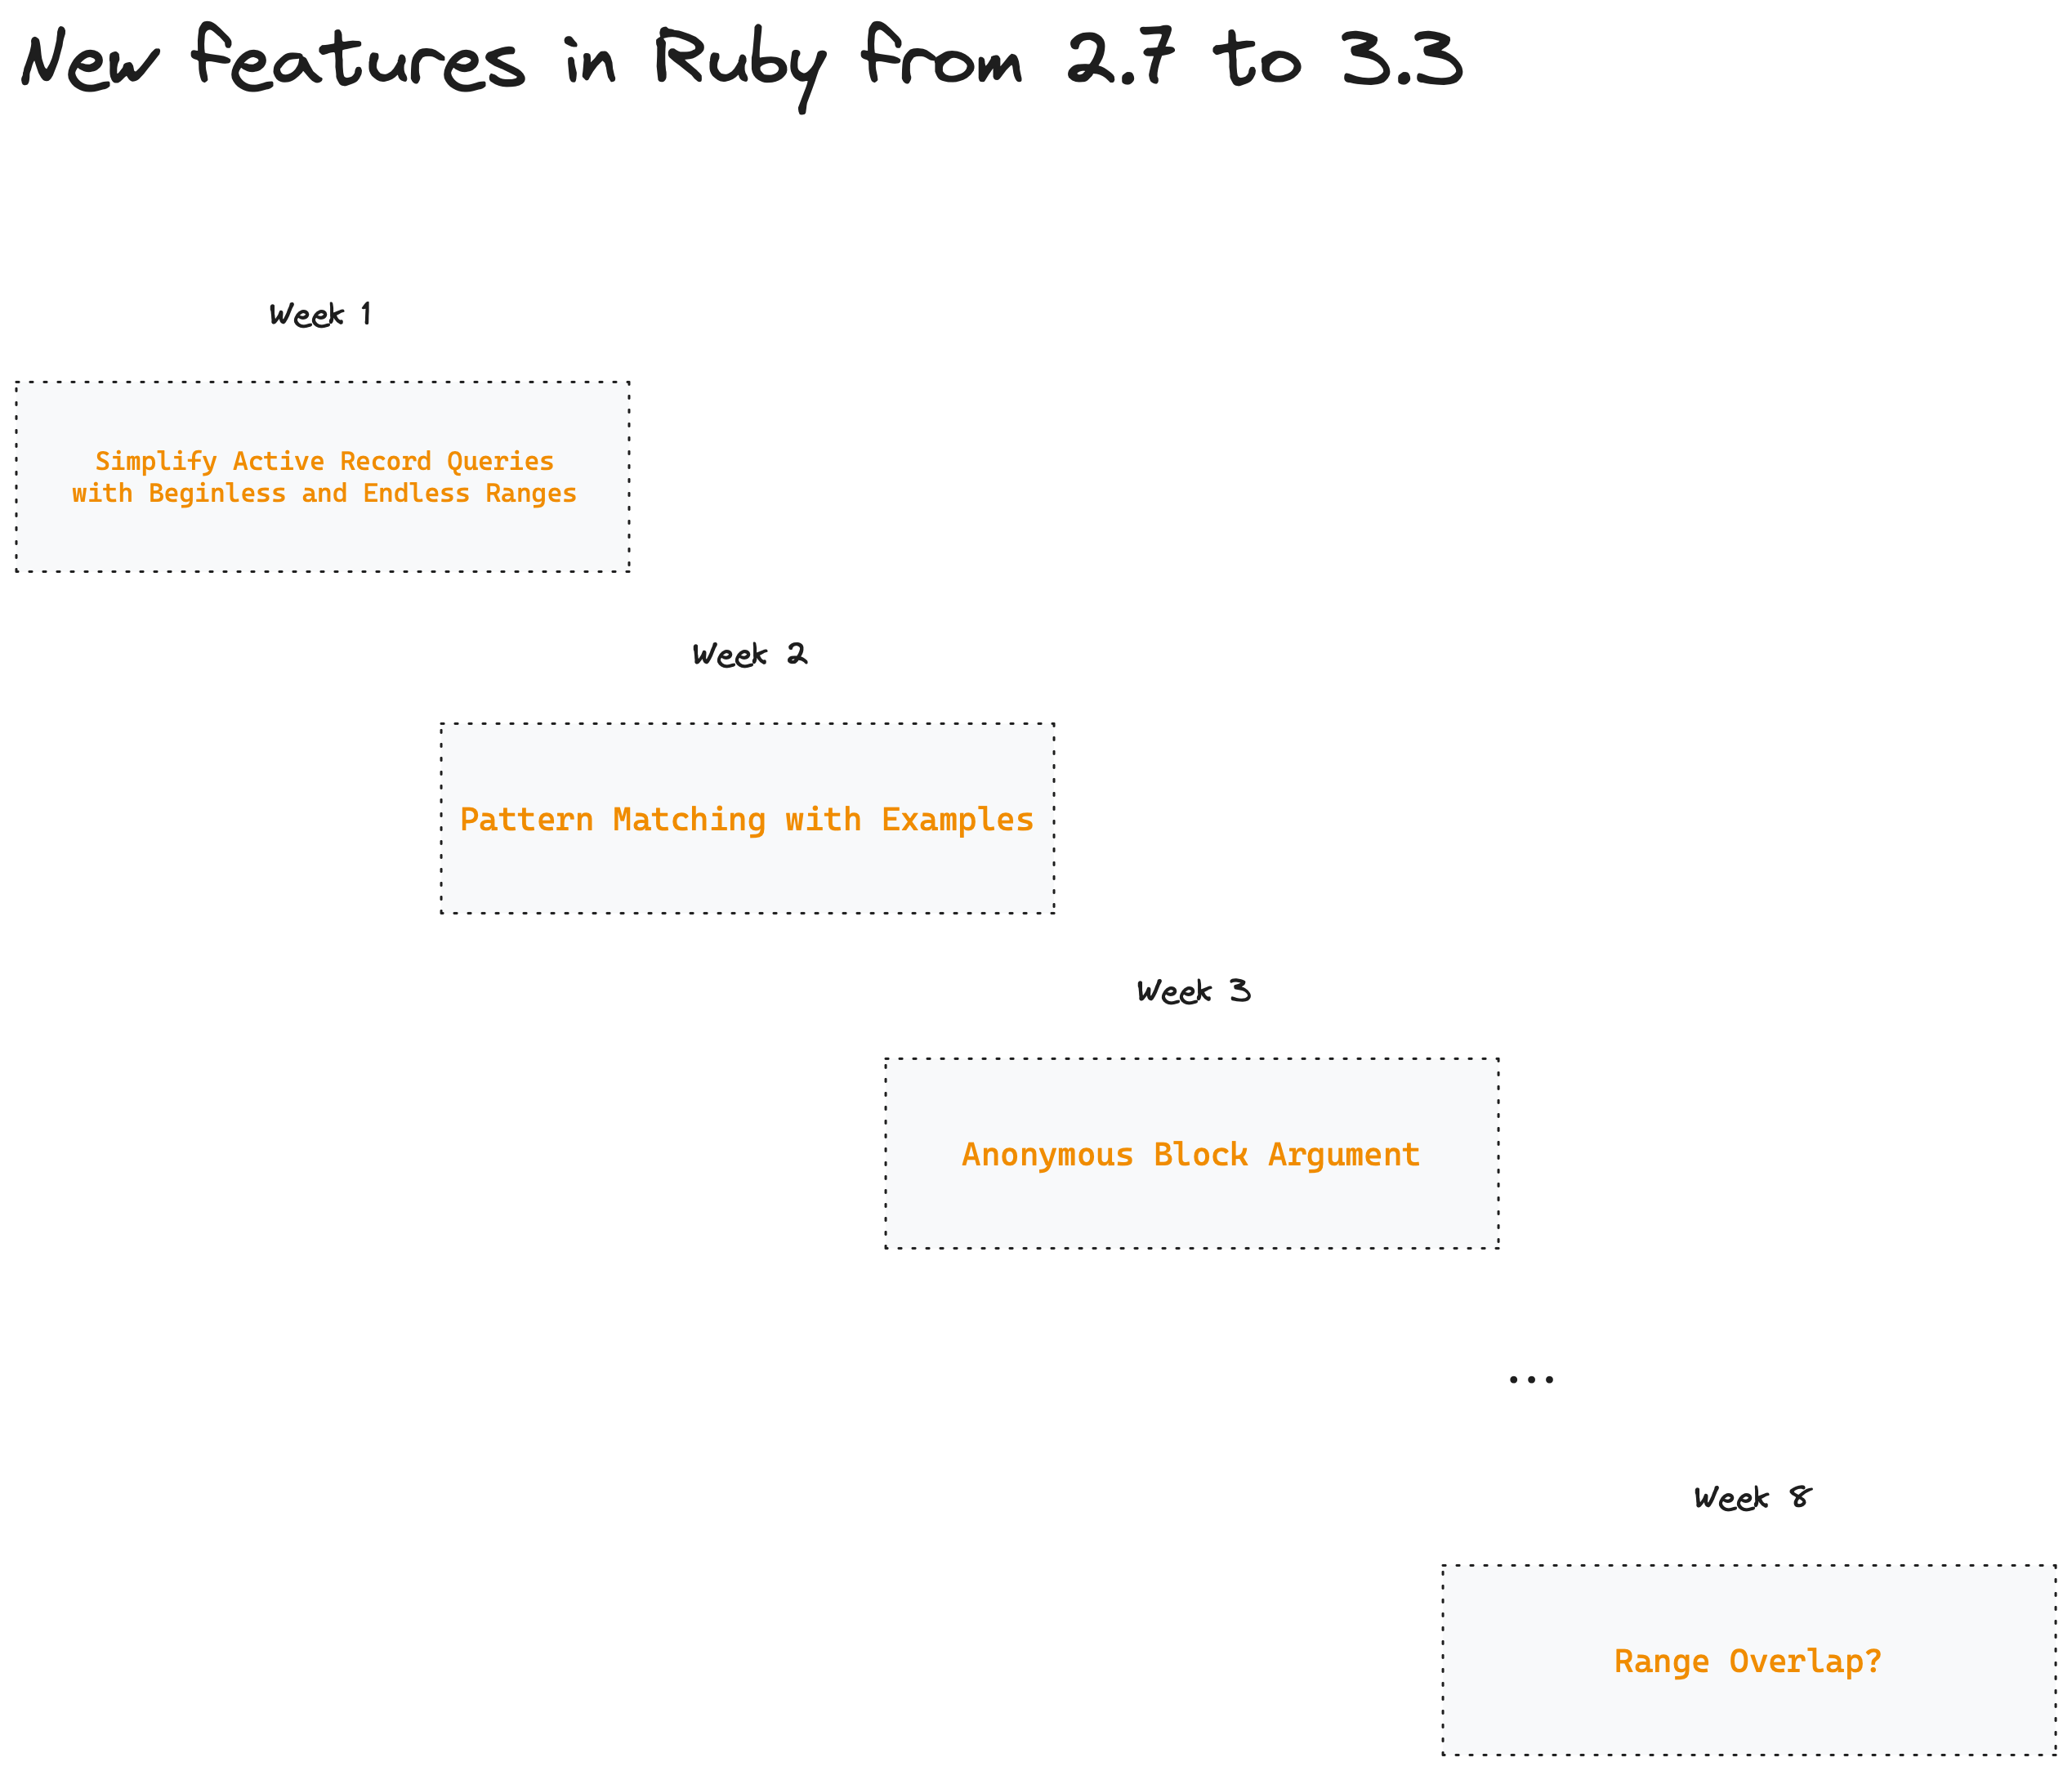 Example of email course about new features in Ruby